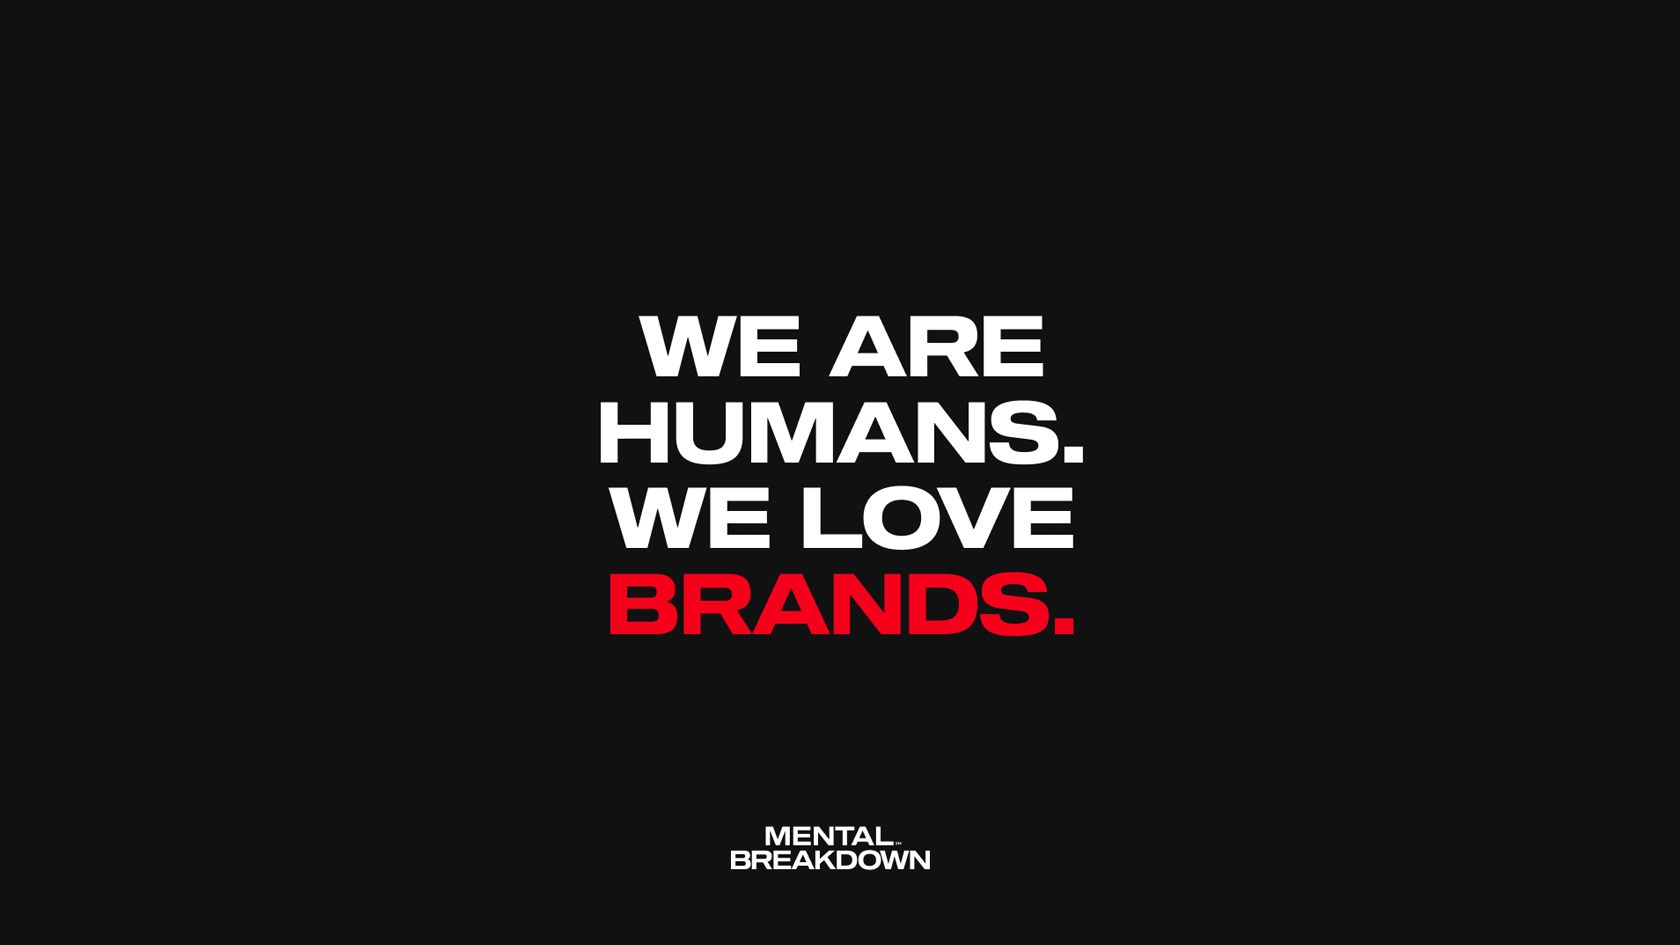 We are humans. We love brands.